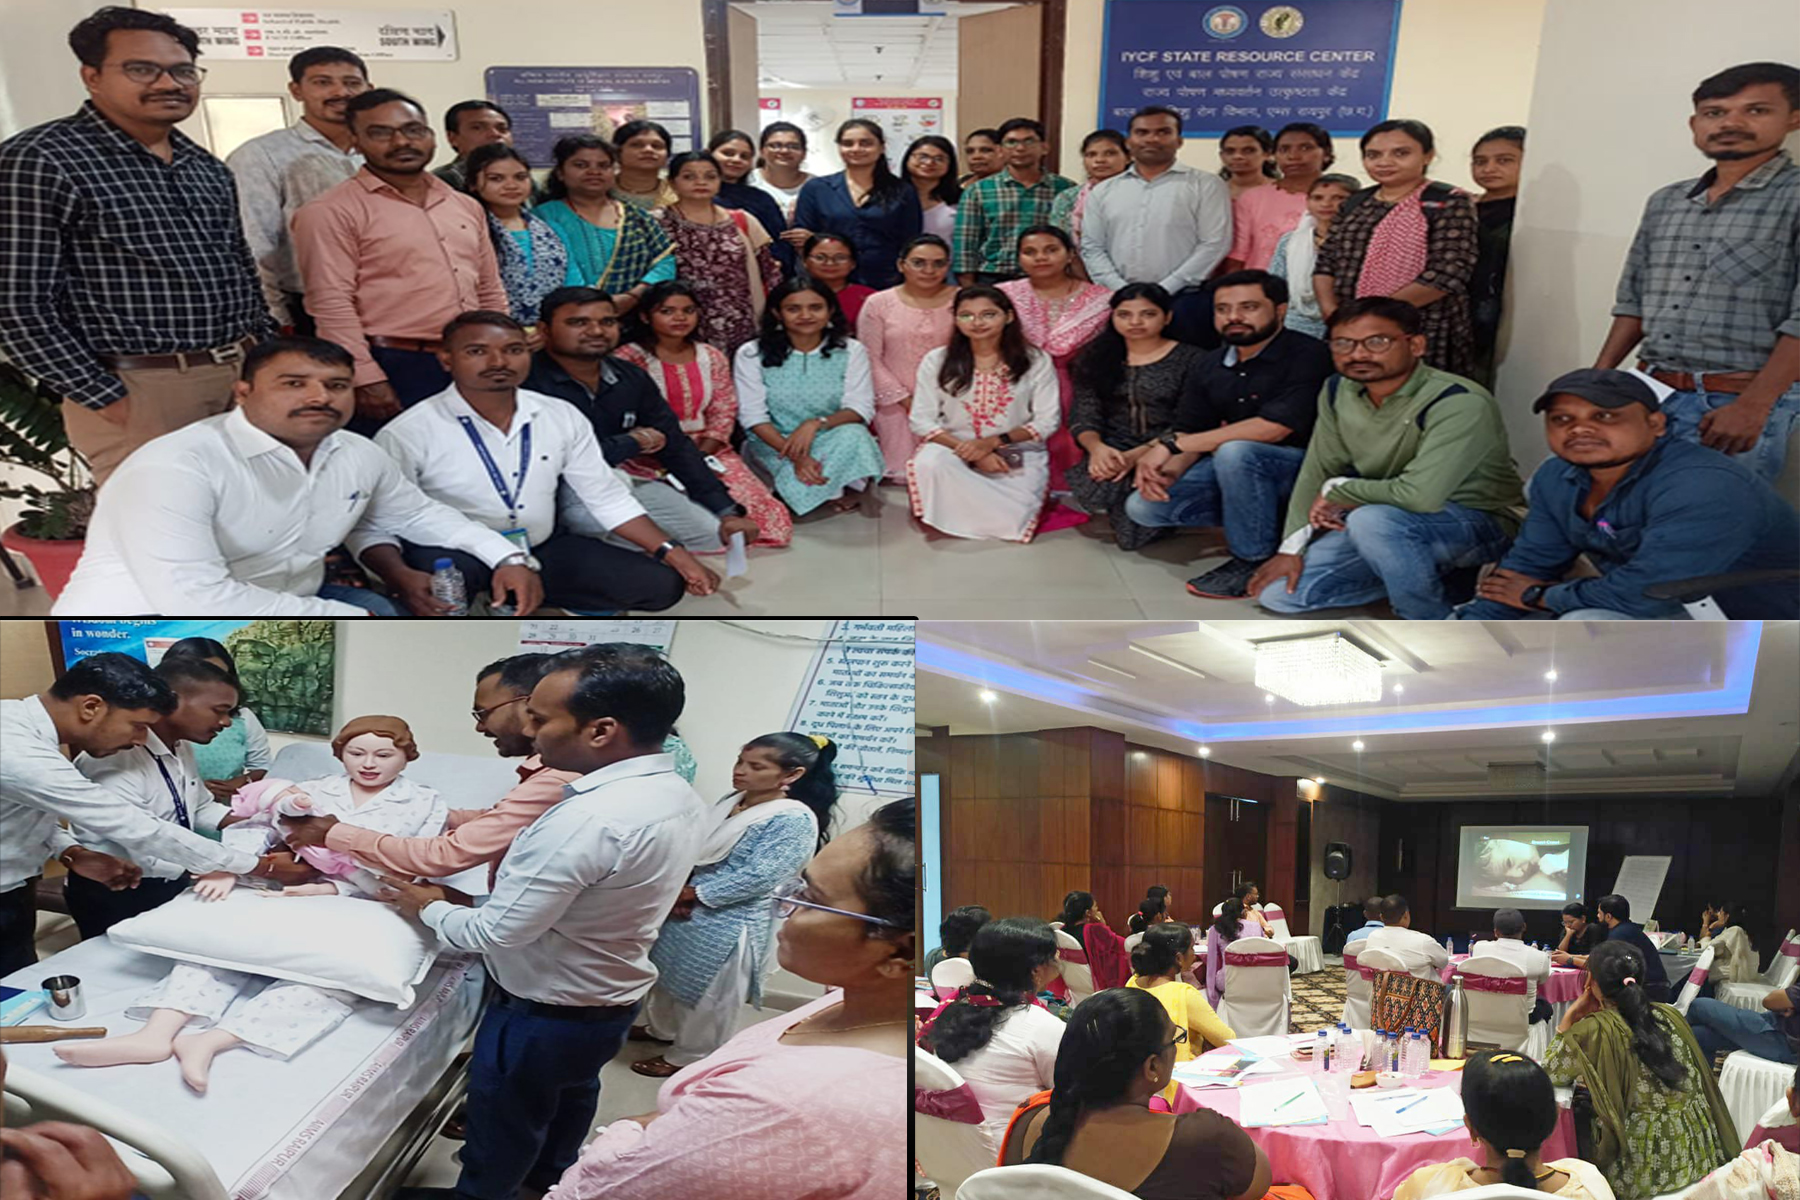 AIIMS Raipur conducted a 3-days residential training on Infant and Young Child Feeding for RMNCH Counselors from all districts of Chhattisgarh